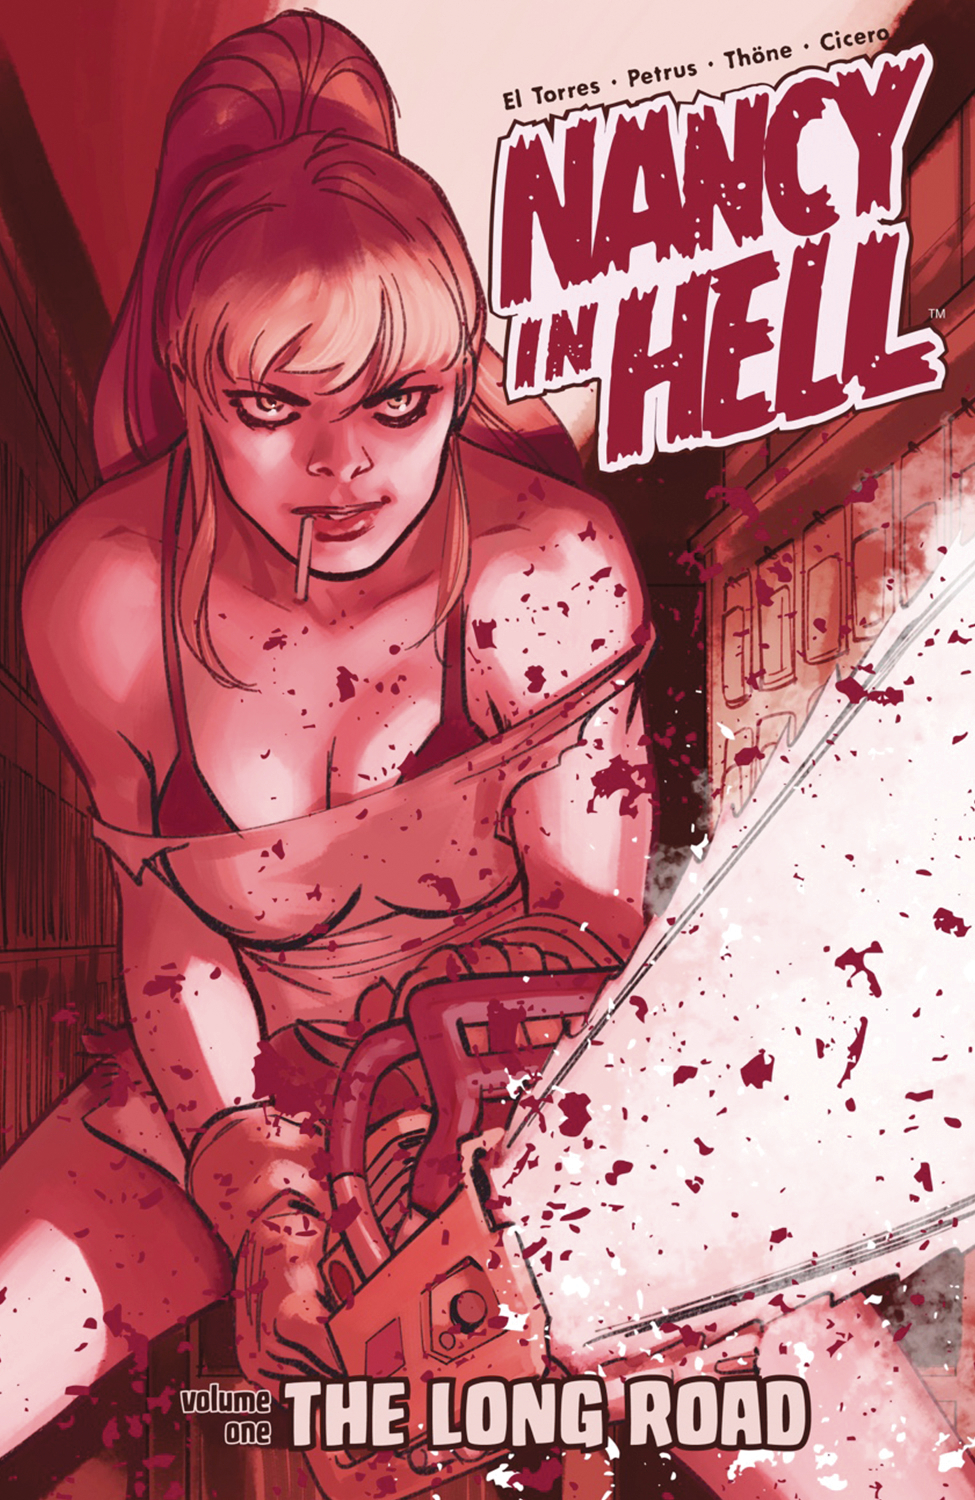 Nancy In Hell Graphic Novel (Mature)